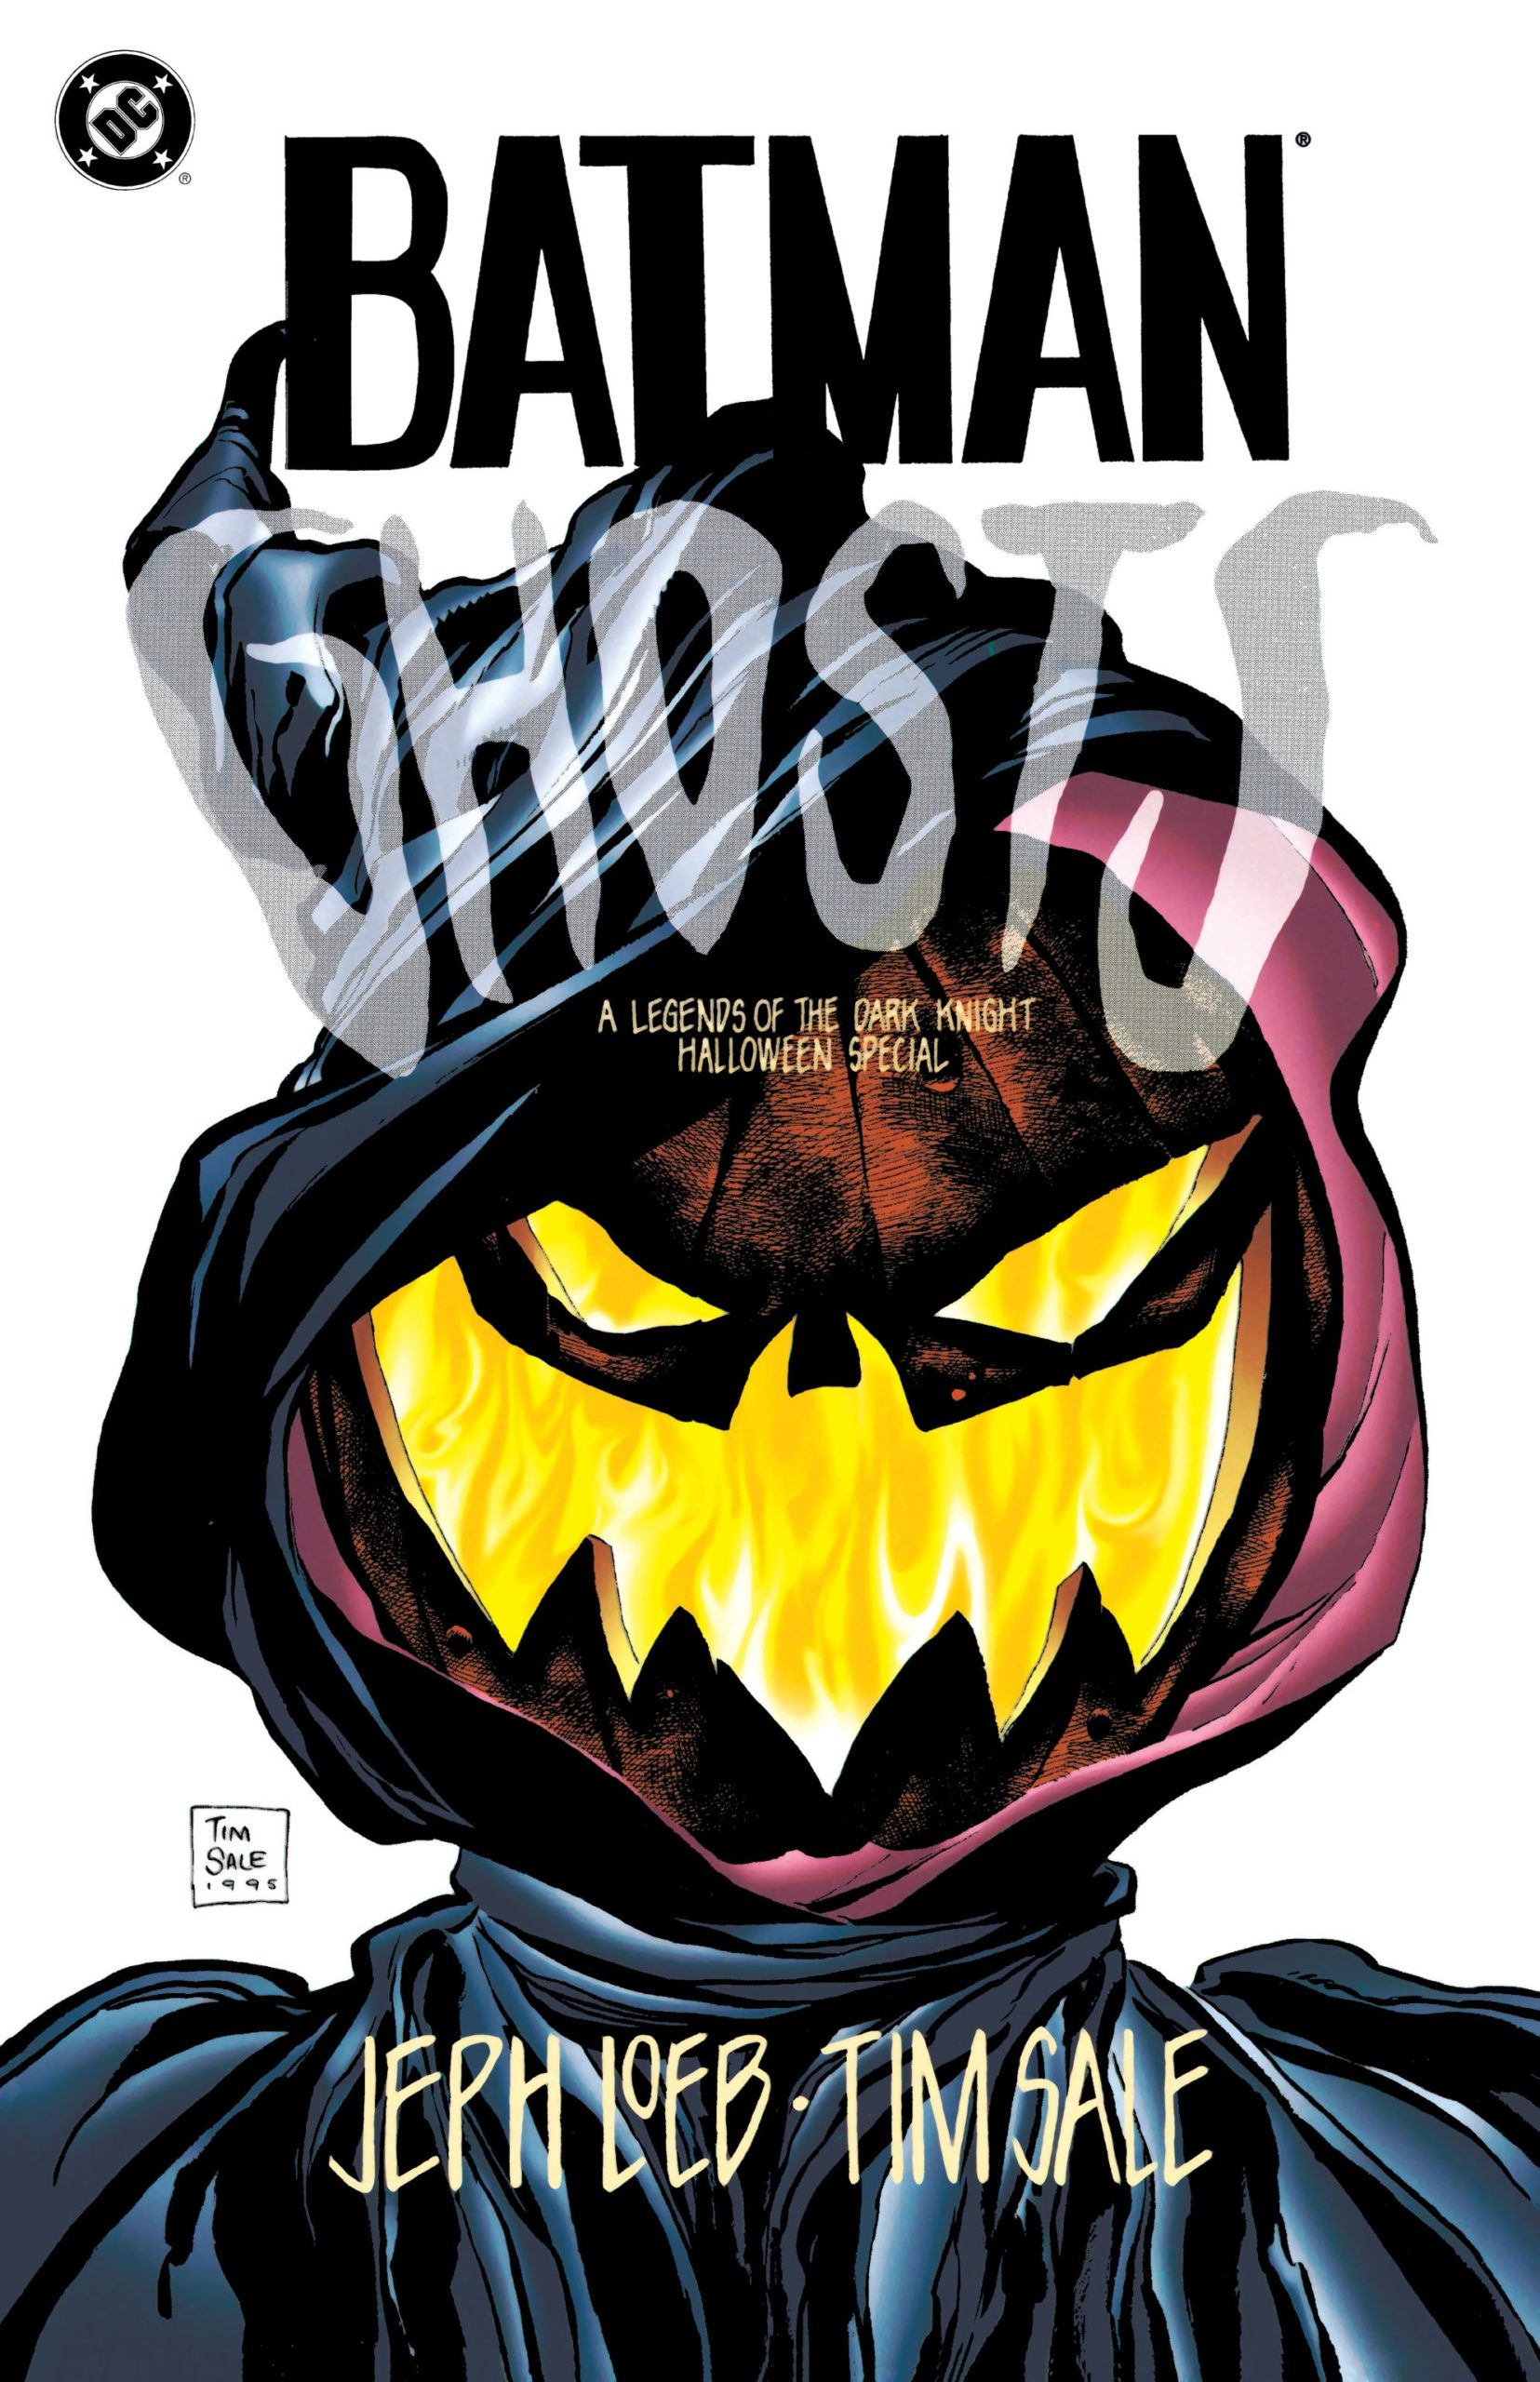 This image is the cover of Batman: Legends of the Dark Knight Halloween Special Vol 1 #3 (1995), showcasing a flaming jack-o'-lantern. 
